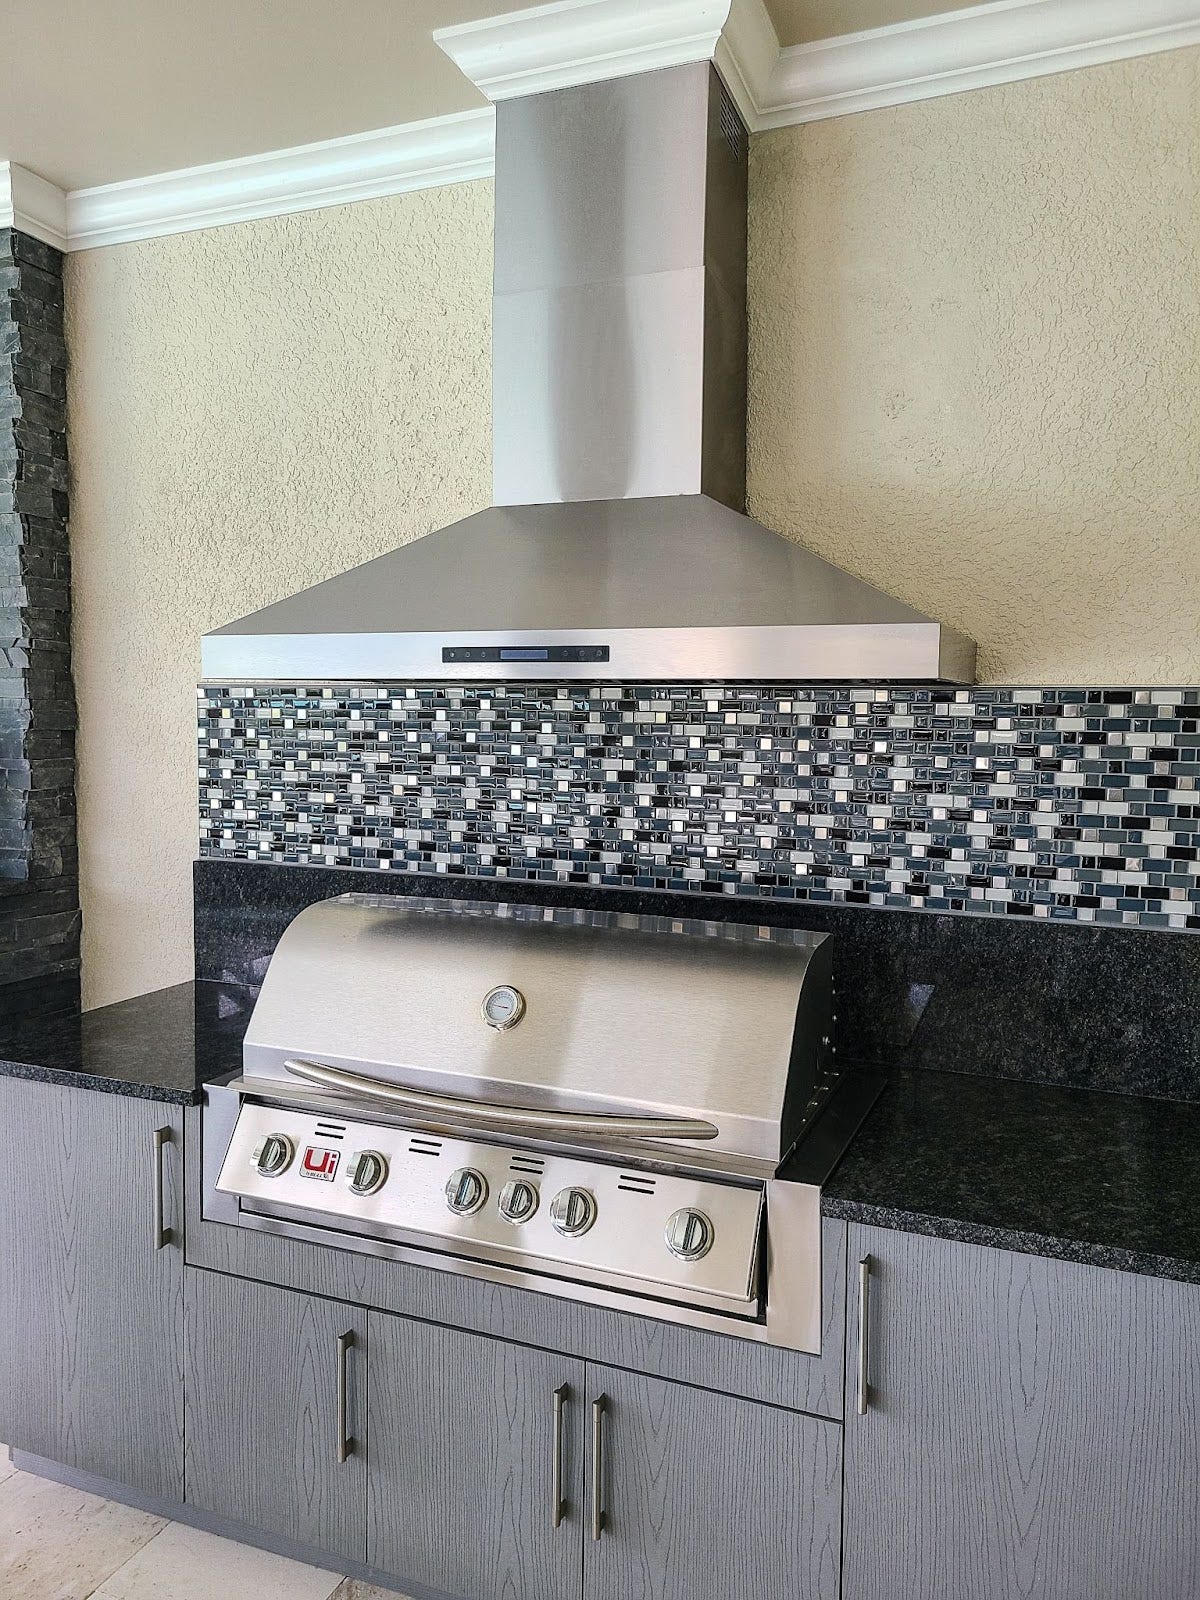 Modern Outdoor Kitchen with Mosaic Backsplash: Proline hood vents smoke in this stylish outdoor kitchen. Mosaic tile backsplash adds a pop of color. Perfect for grilling and entertaining with a modern feel. - Proline Range Hoods - prolinerangehoods.com 